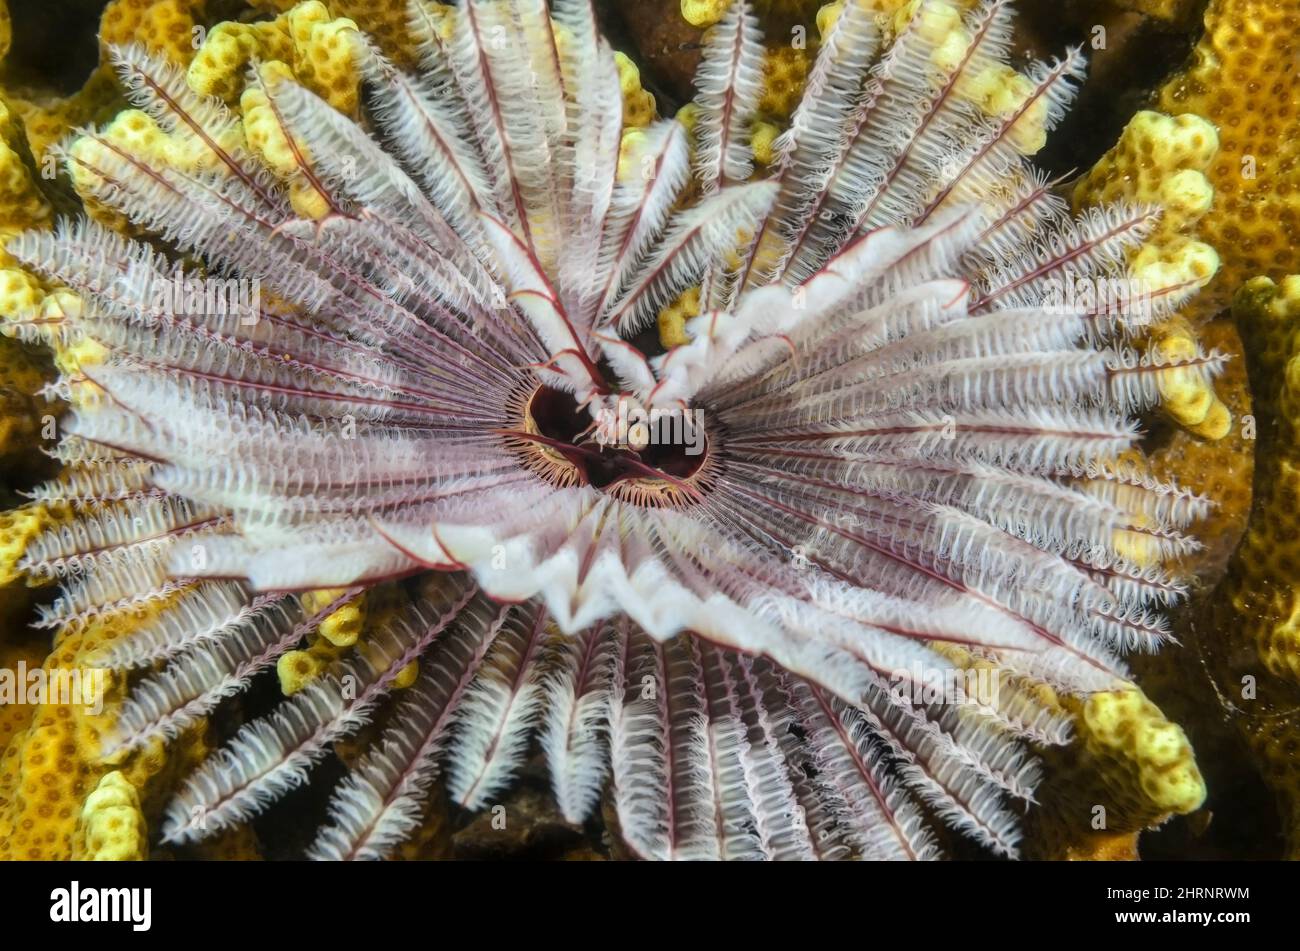 Feather duster worm, Sabellastarte sp. , Gilimanuk Bay, Bali, Indonesia, Pacific Stock Photo